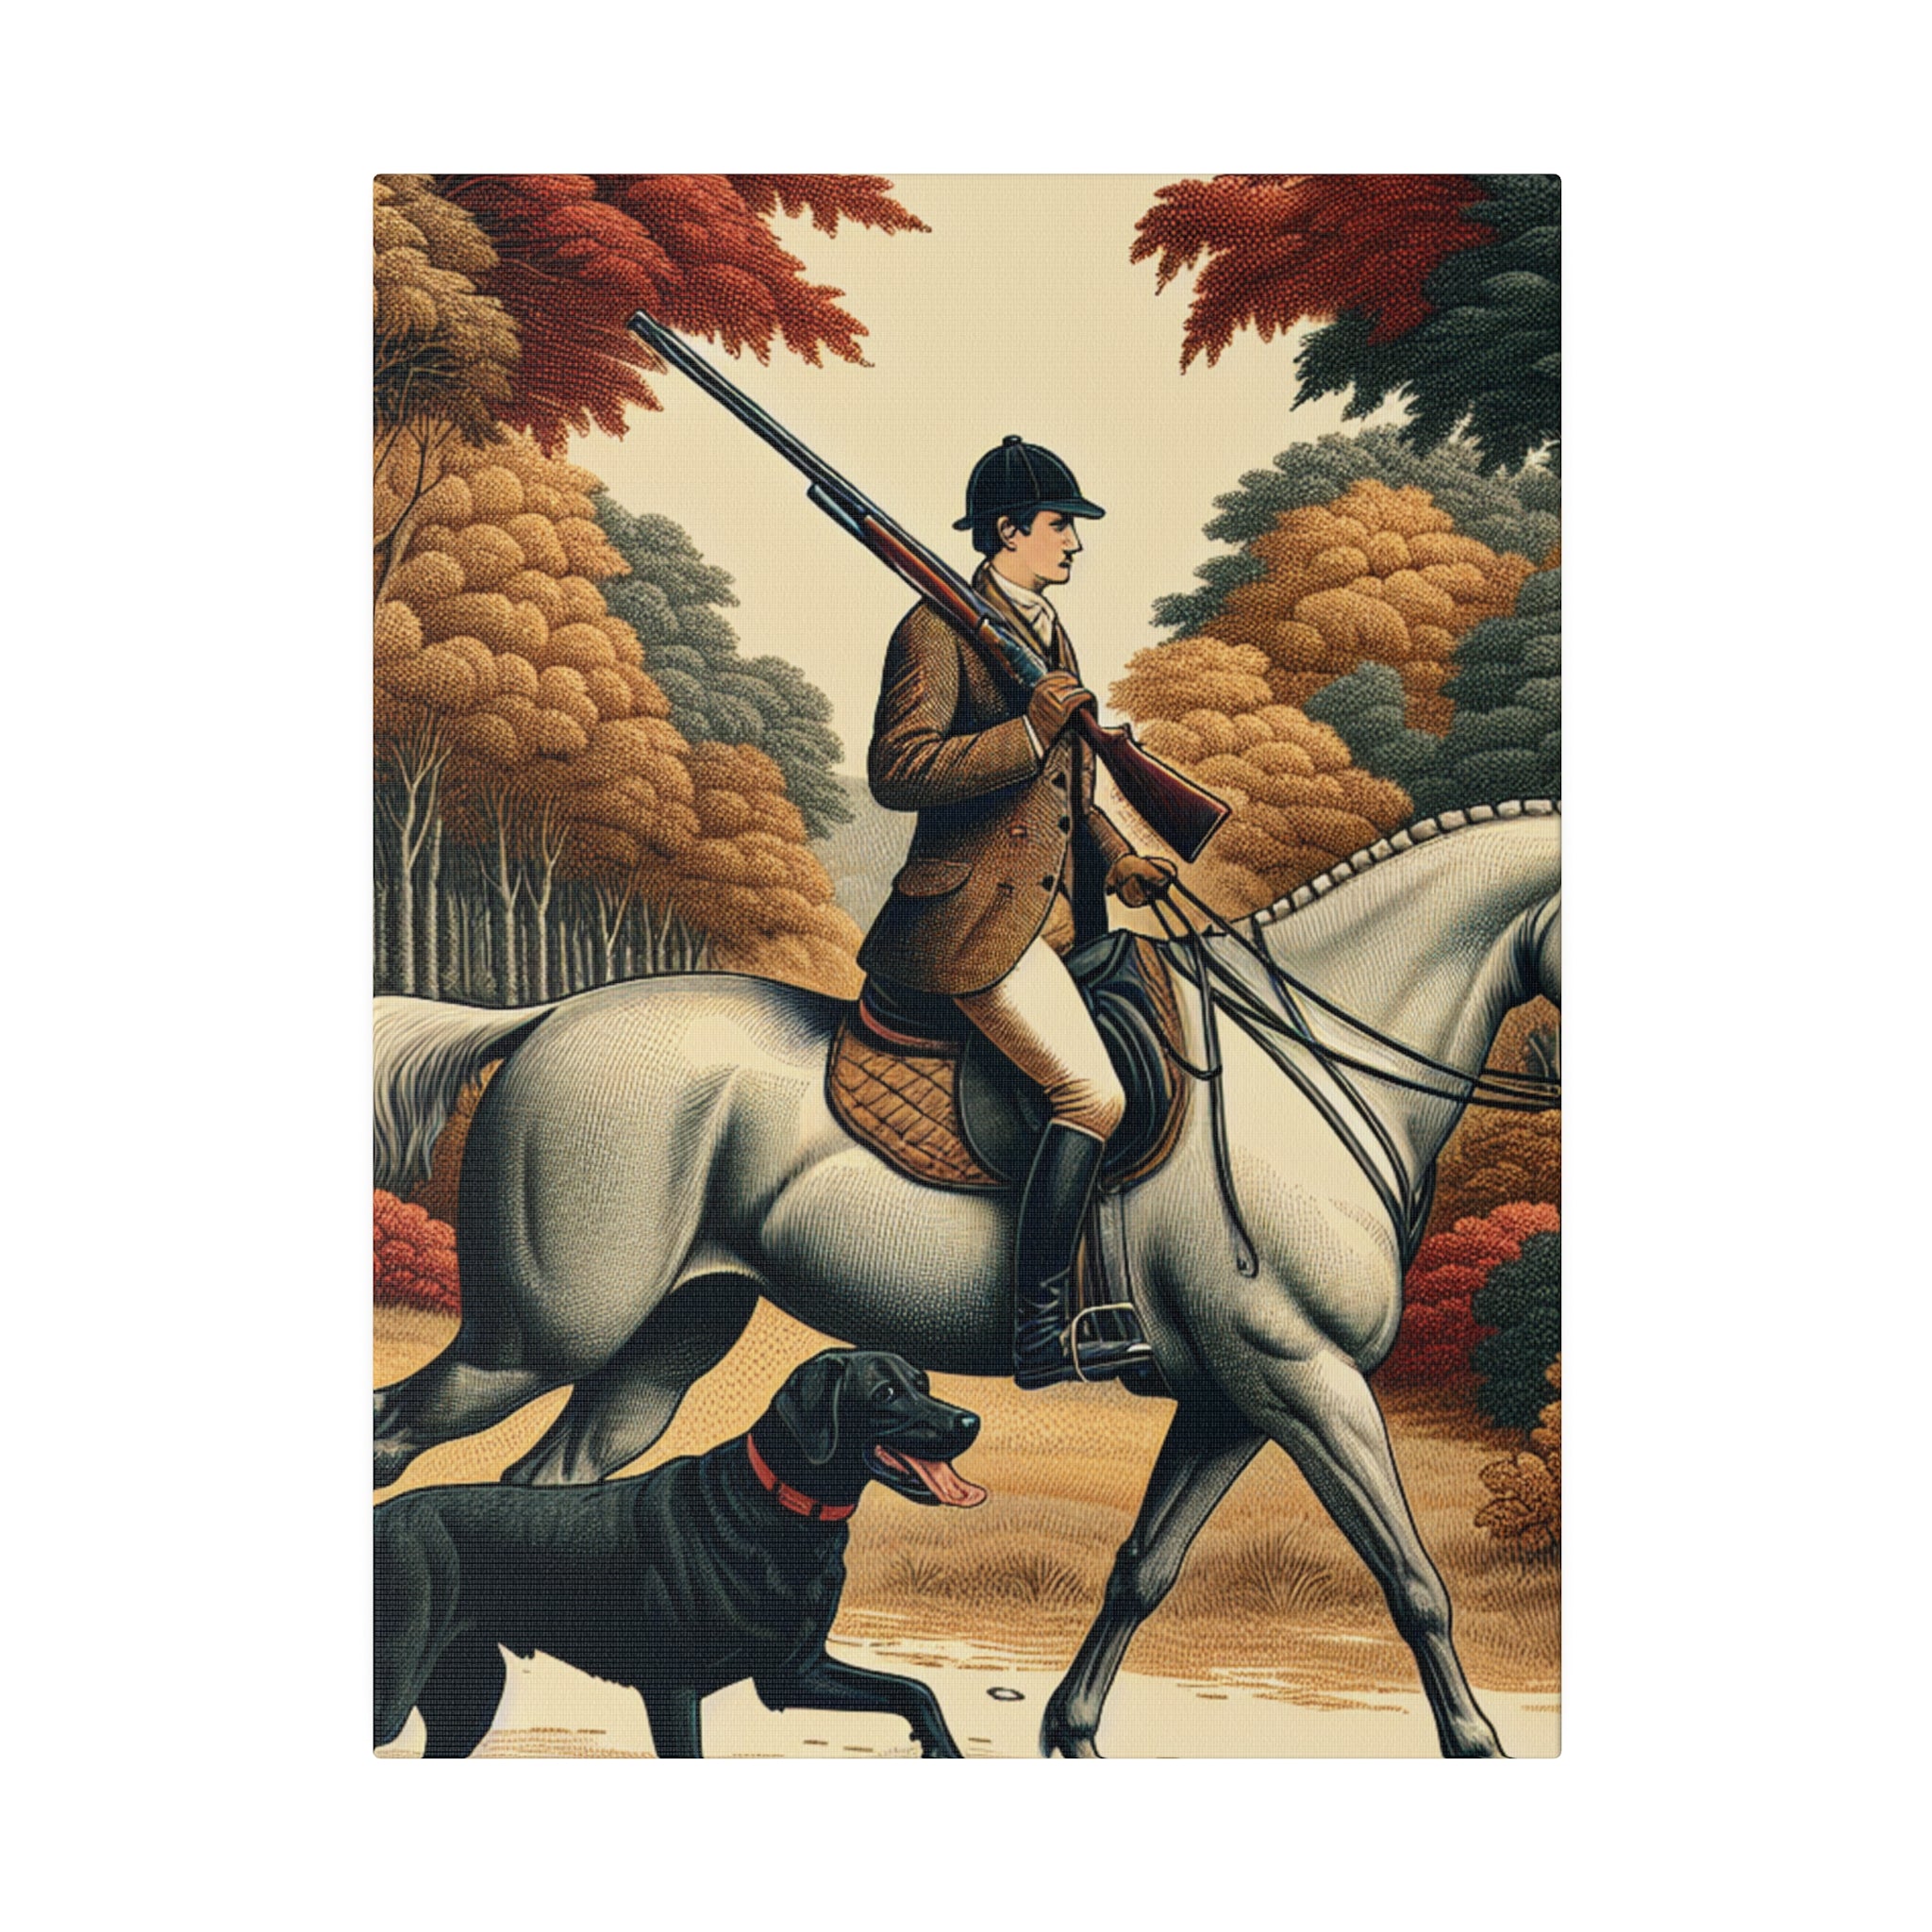 "Hunting Harmony: A Majestic Canvas Wall Art Collection"